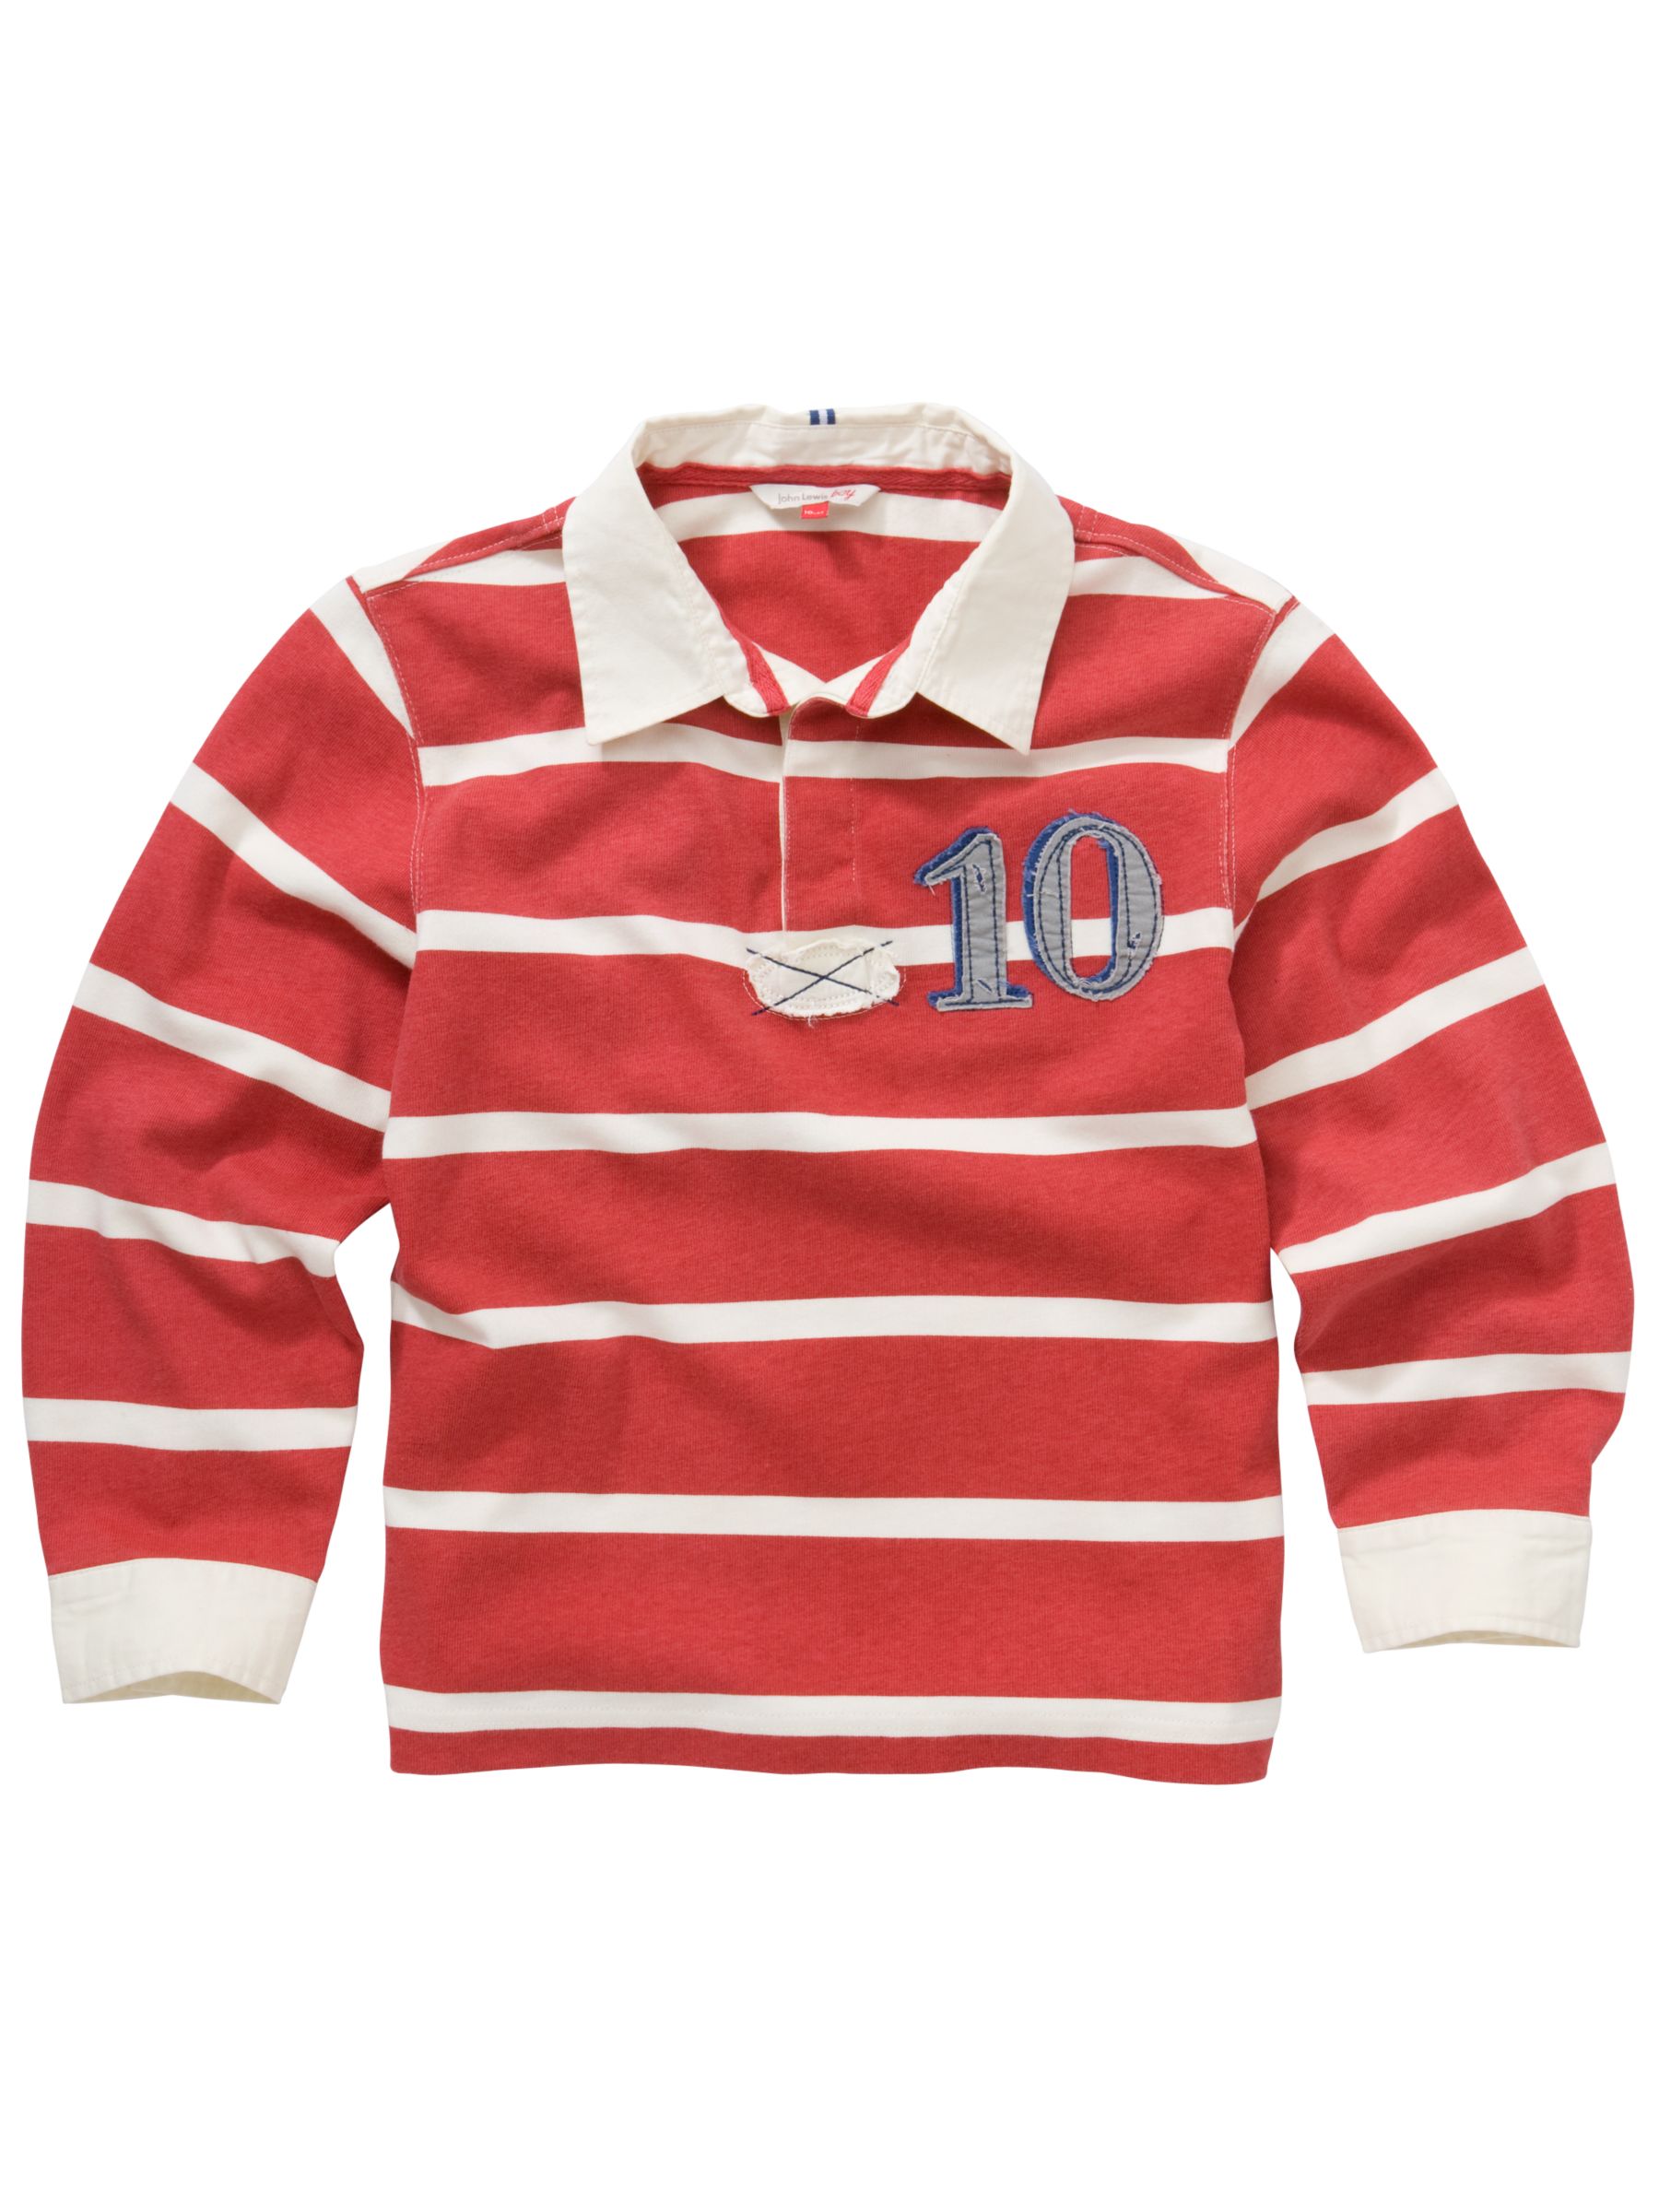 Stripe Rugby Shirt, Red/white, 12